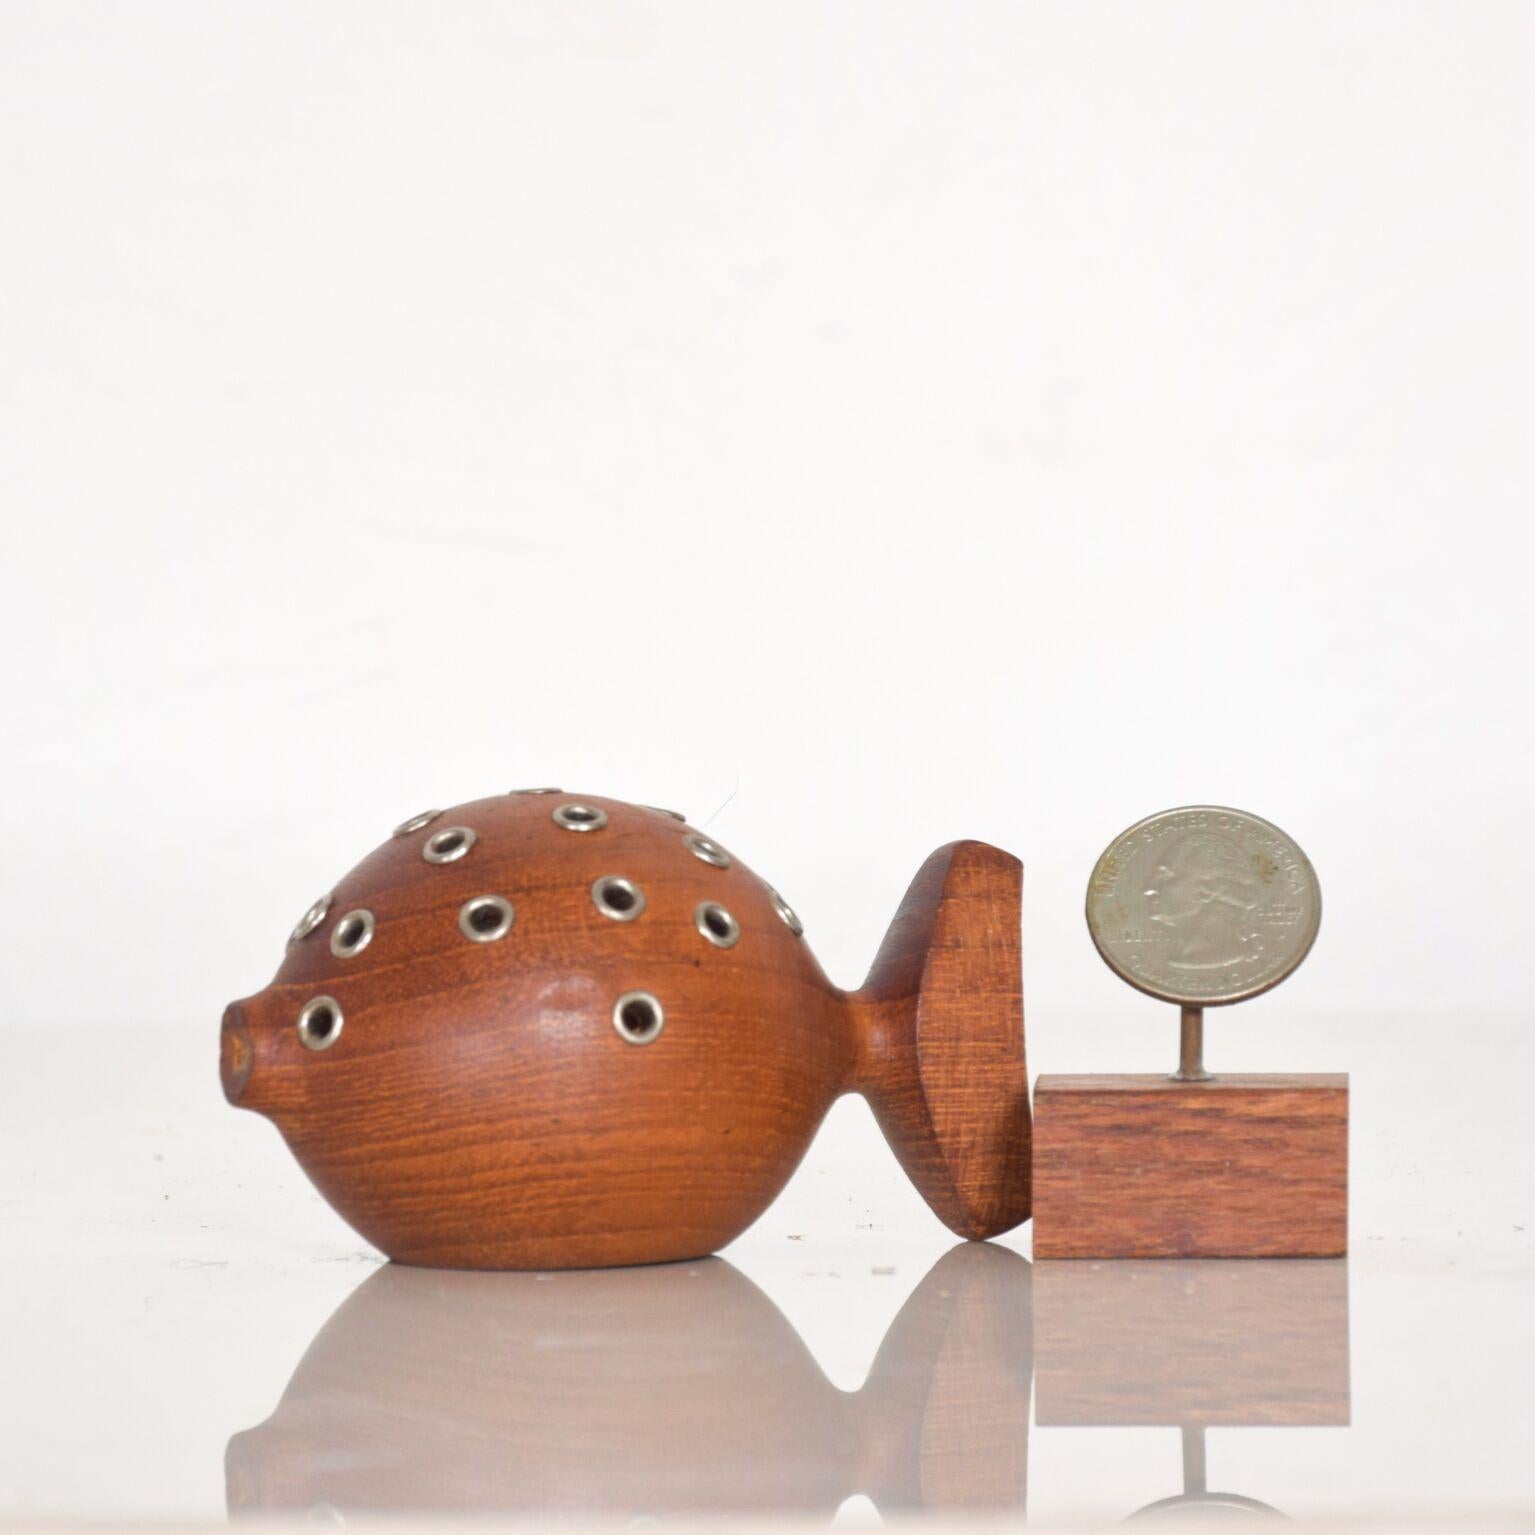 For your pleasure vintage Mid-Century Modern: Whimsical teak puffer fish toothpick holder Appetizer server from Denmark. In the style of Ernst Henriksen, 1960s. Metal eyelets on Solid Teak Wood.

Dimensions: 3 1/2